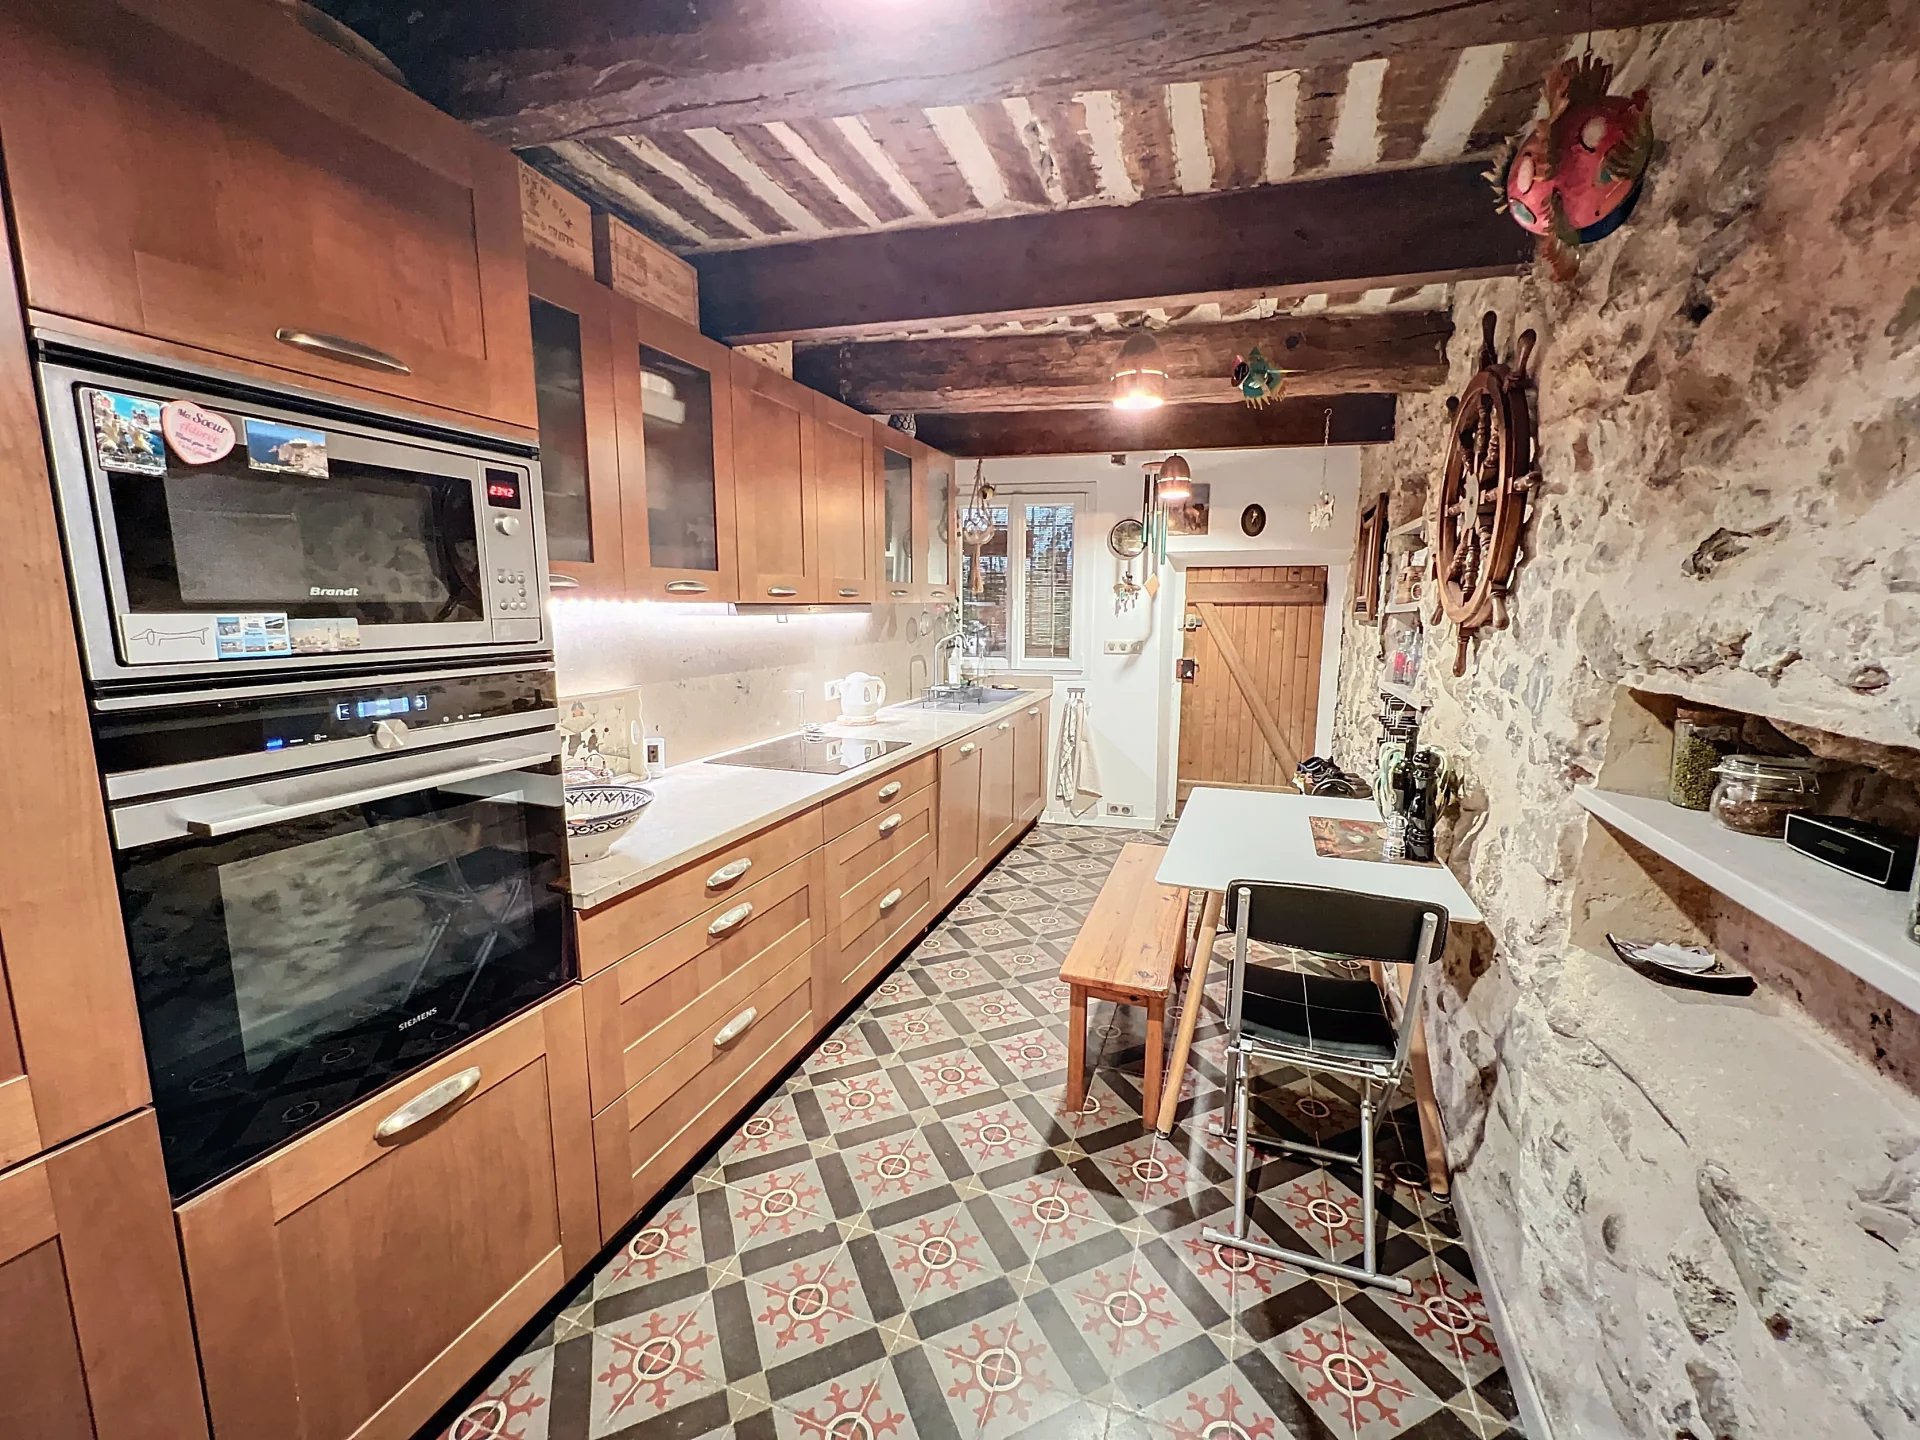 EXCLUSIVE HOUSE IN THE HEART OF OLD ANTIBES WITH ITS PREMISES OR PERSONAL ART GALLERY